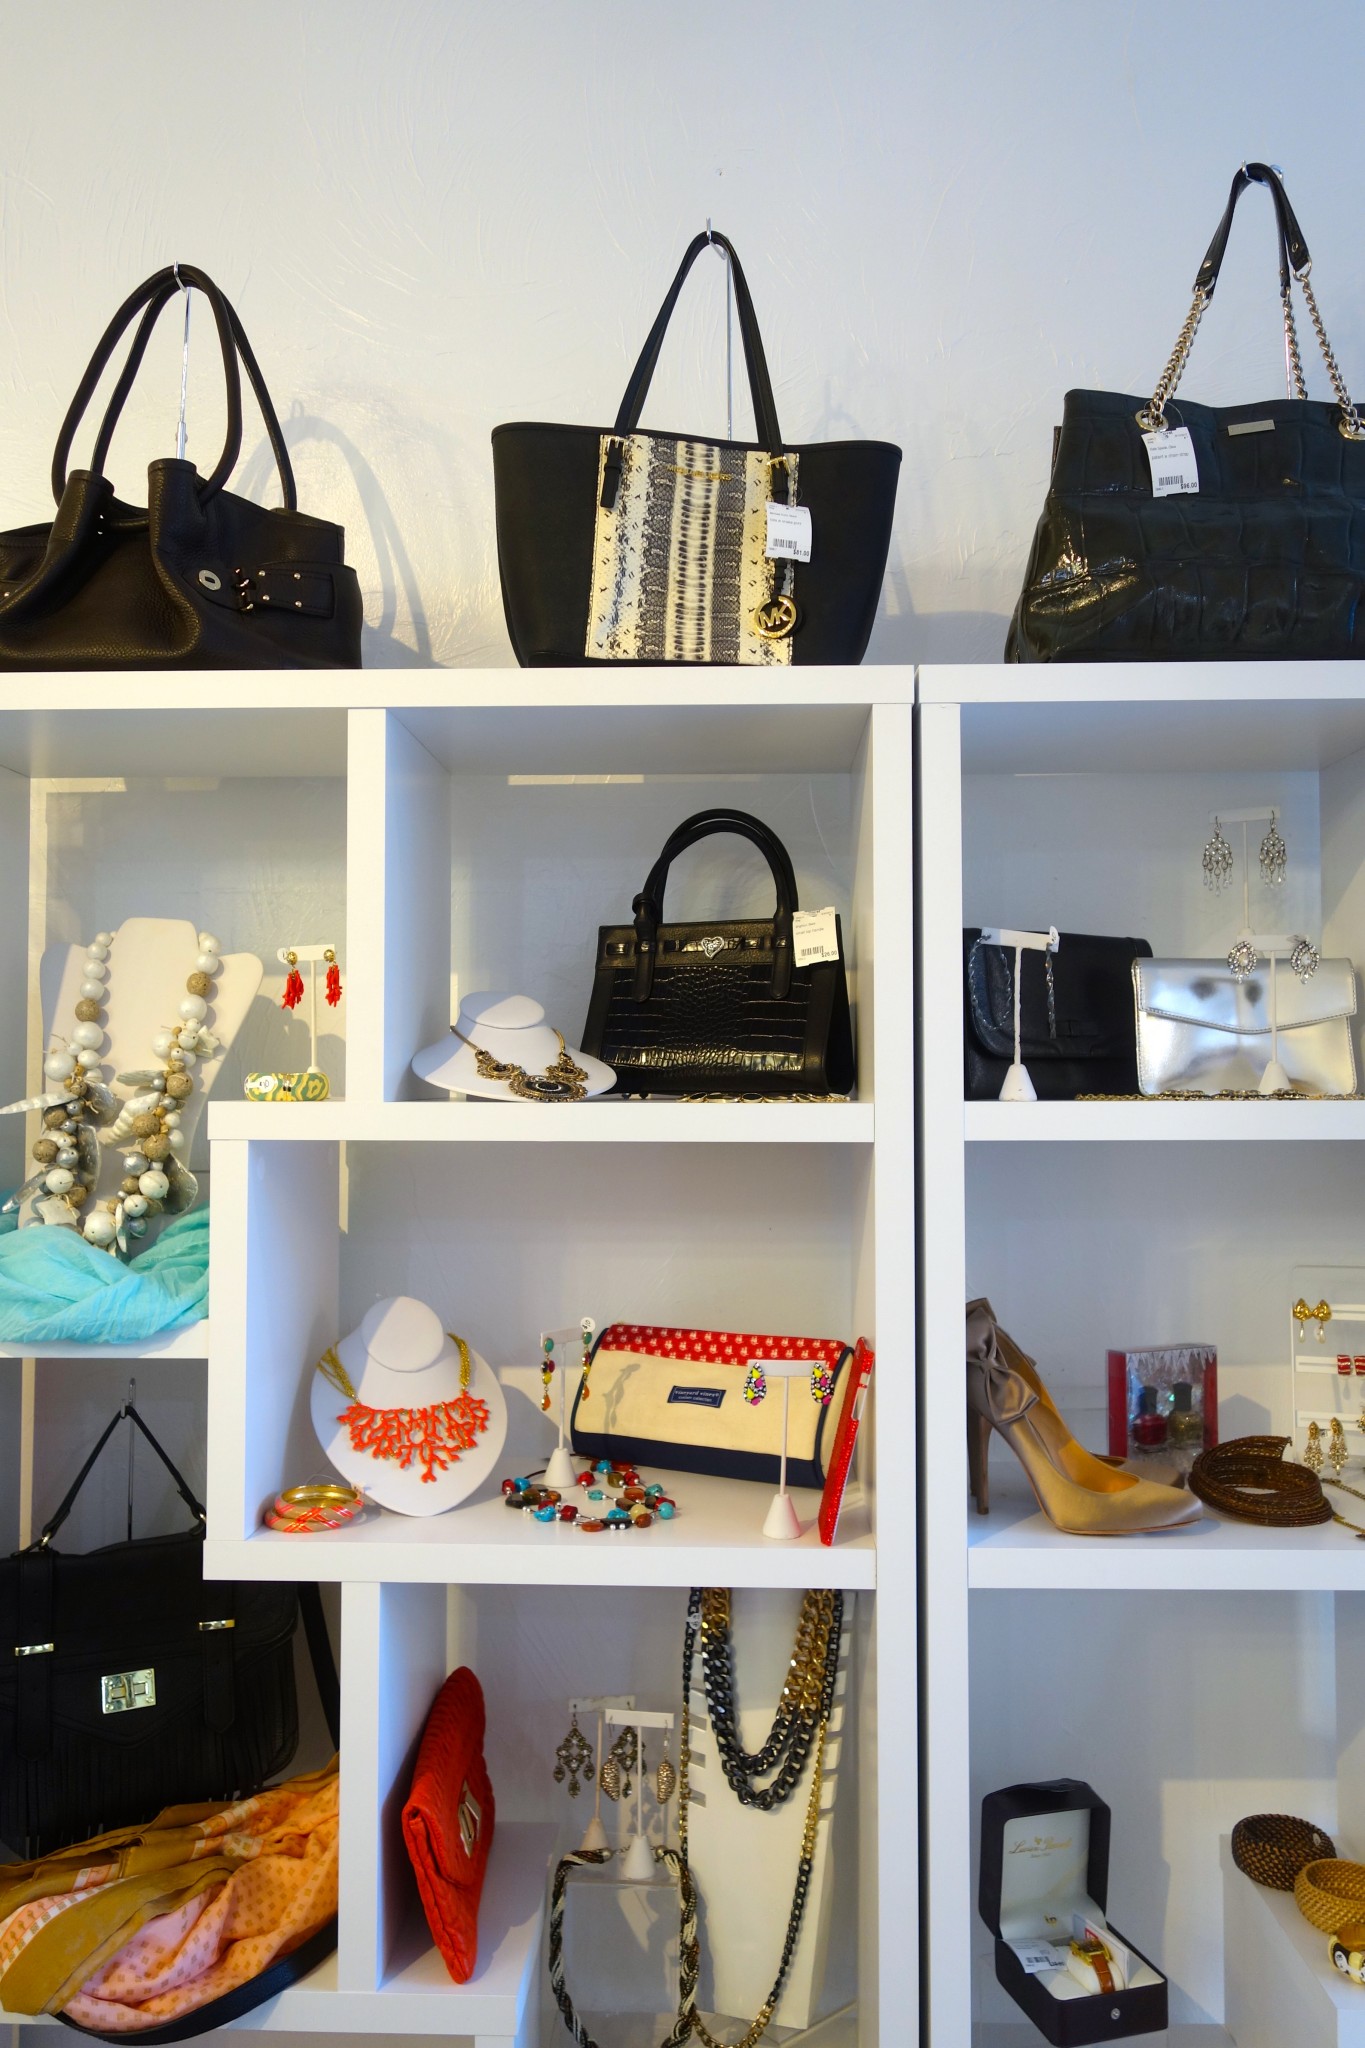 Buy, Sell & Consign Used Designer Handbags - Consigned Designs